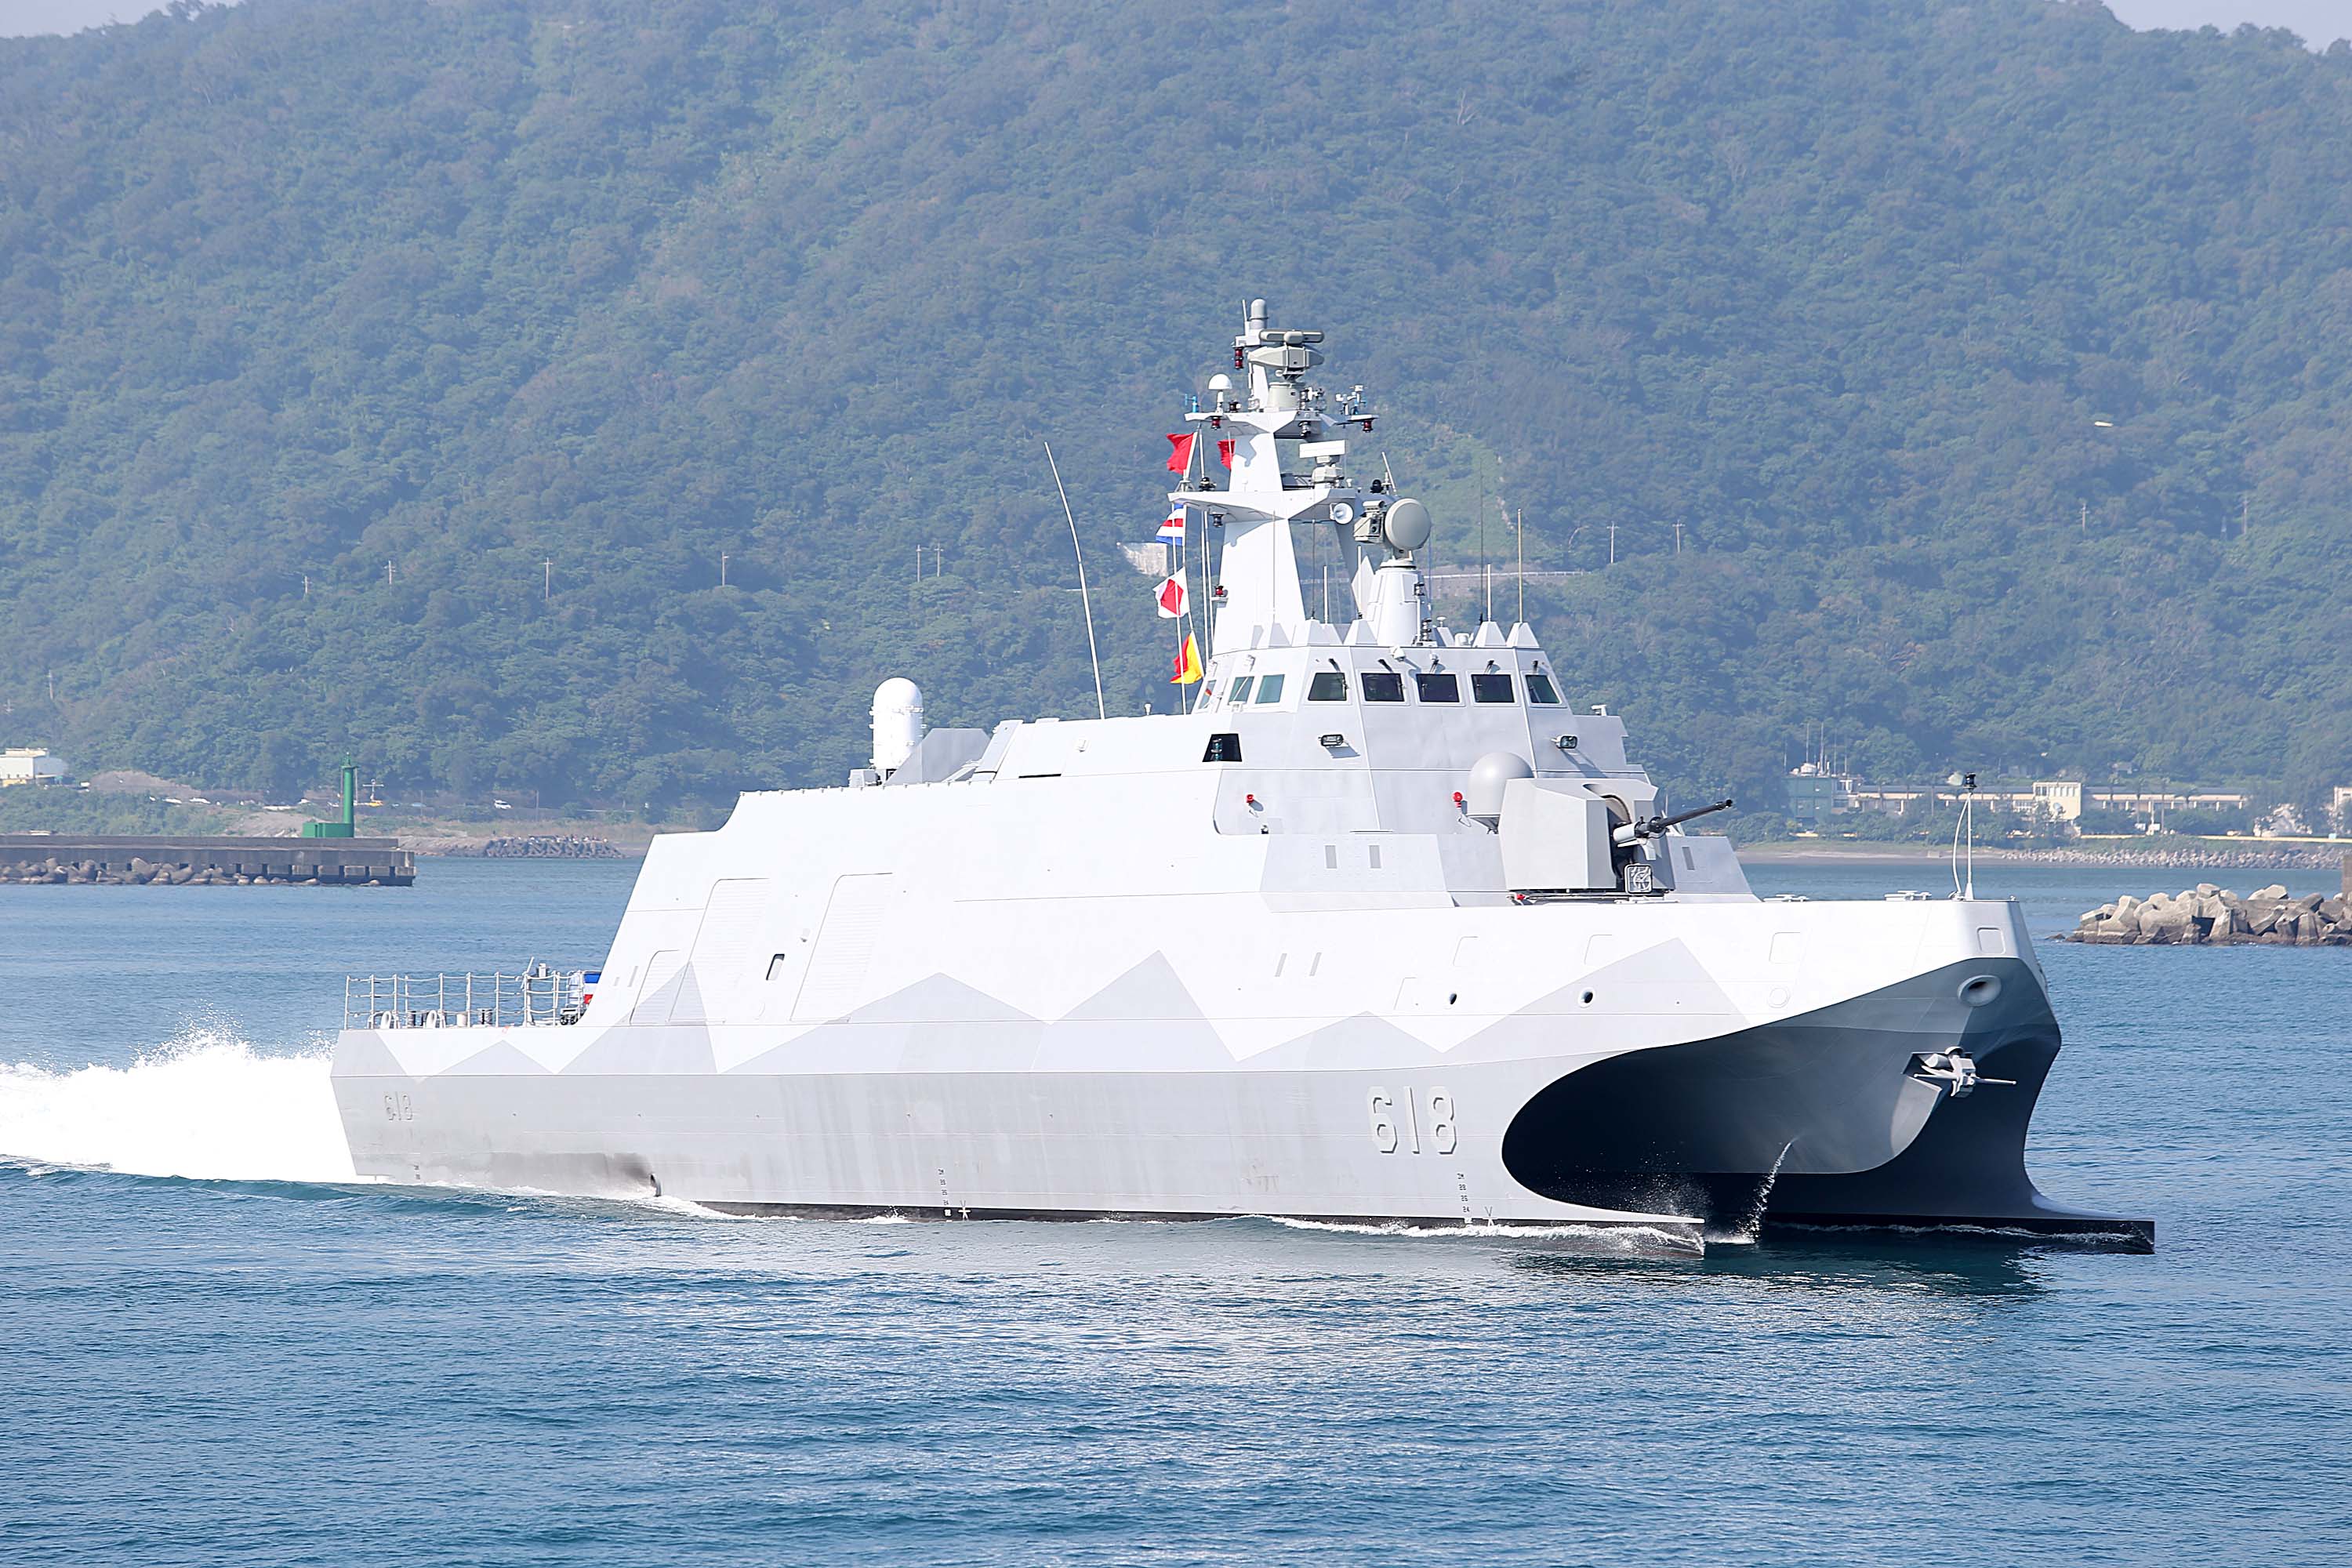 Guided missile corvette Tuo Jiang on December 2014. via wikipedia